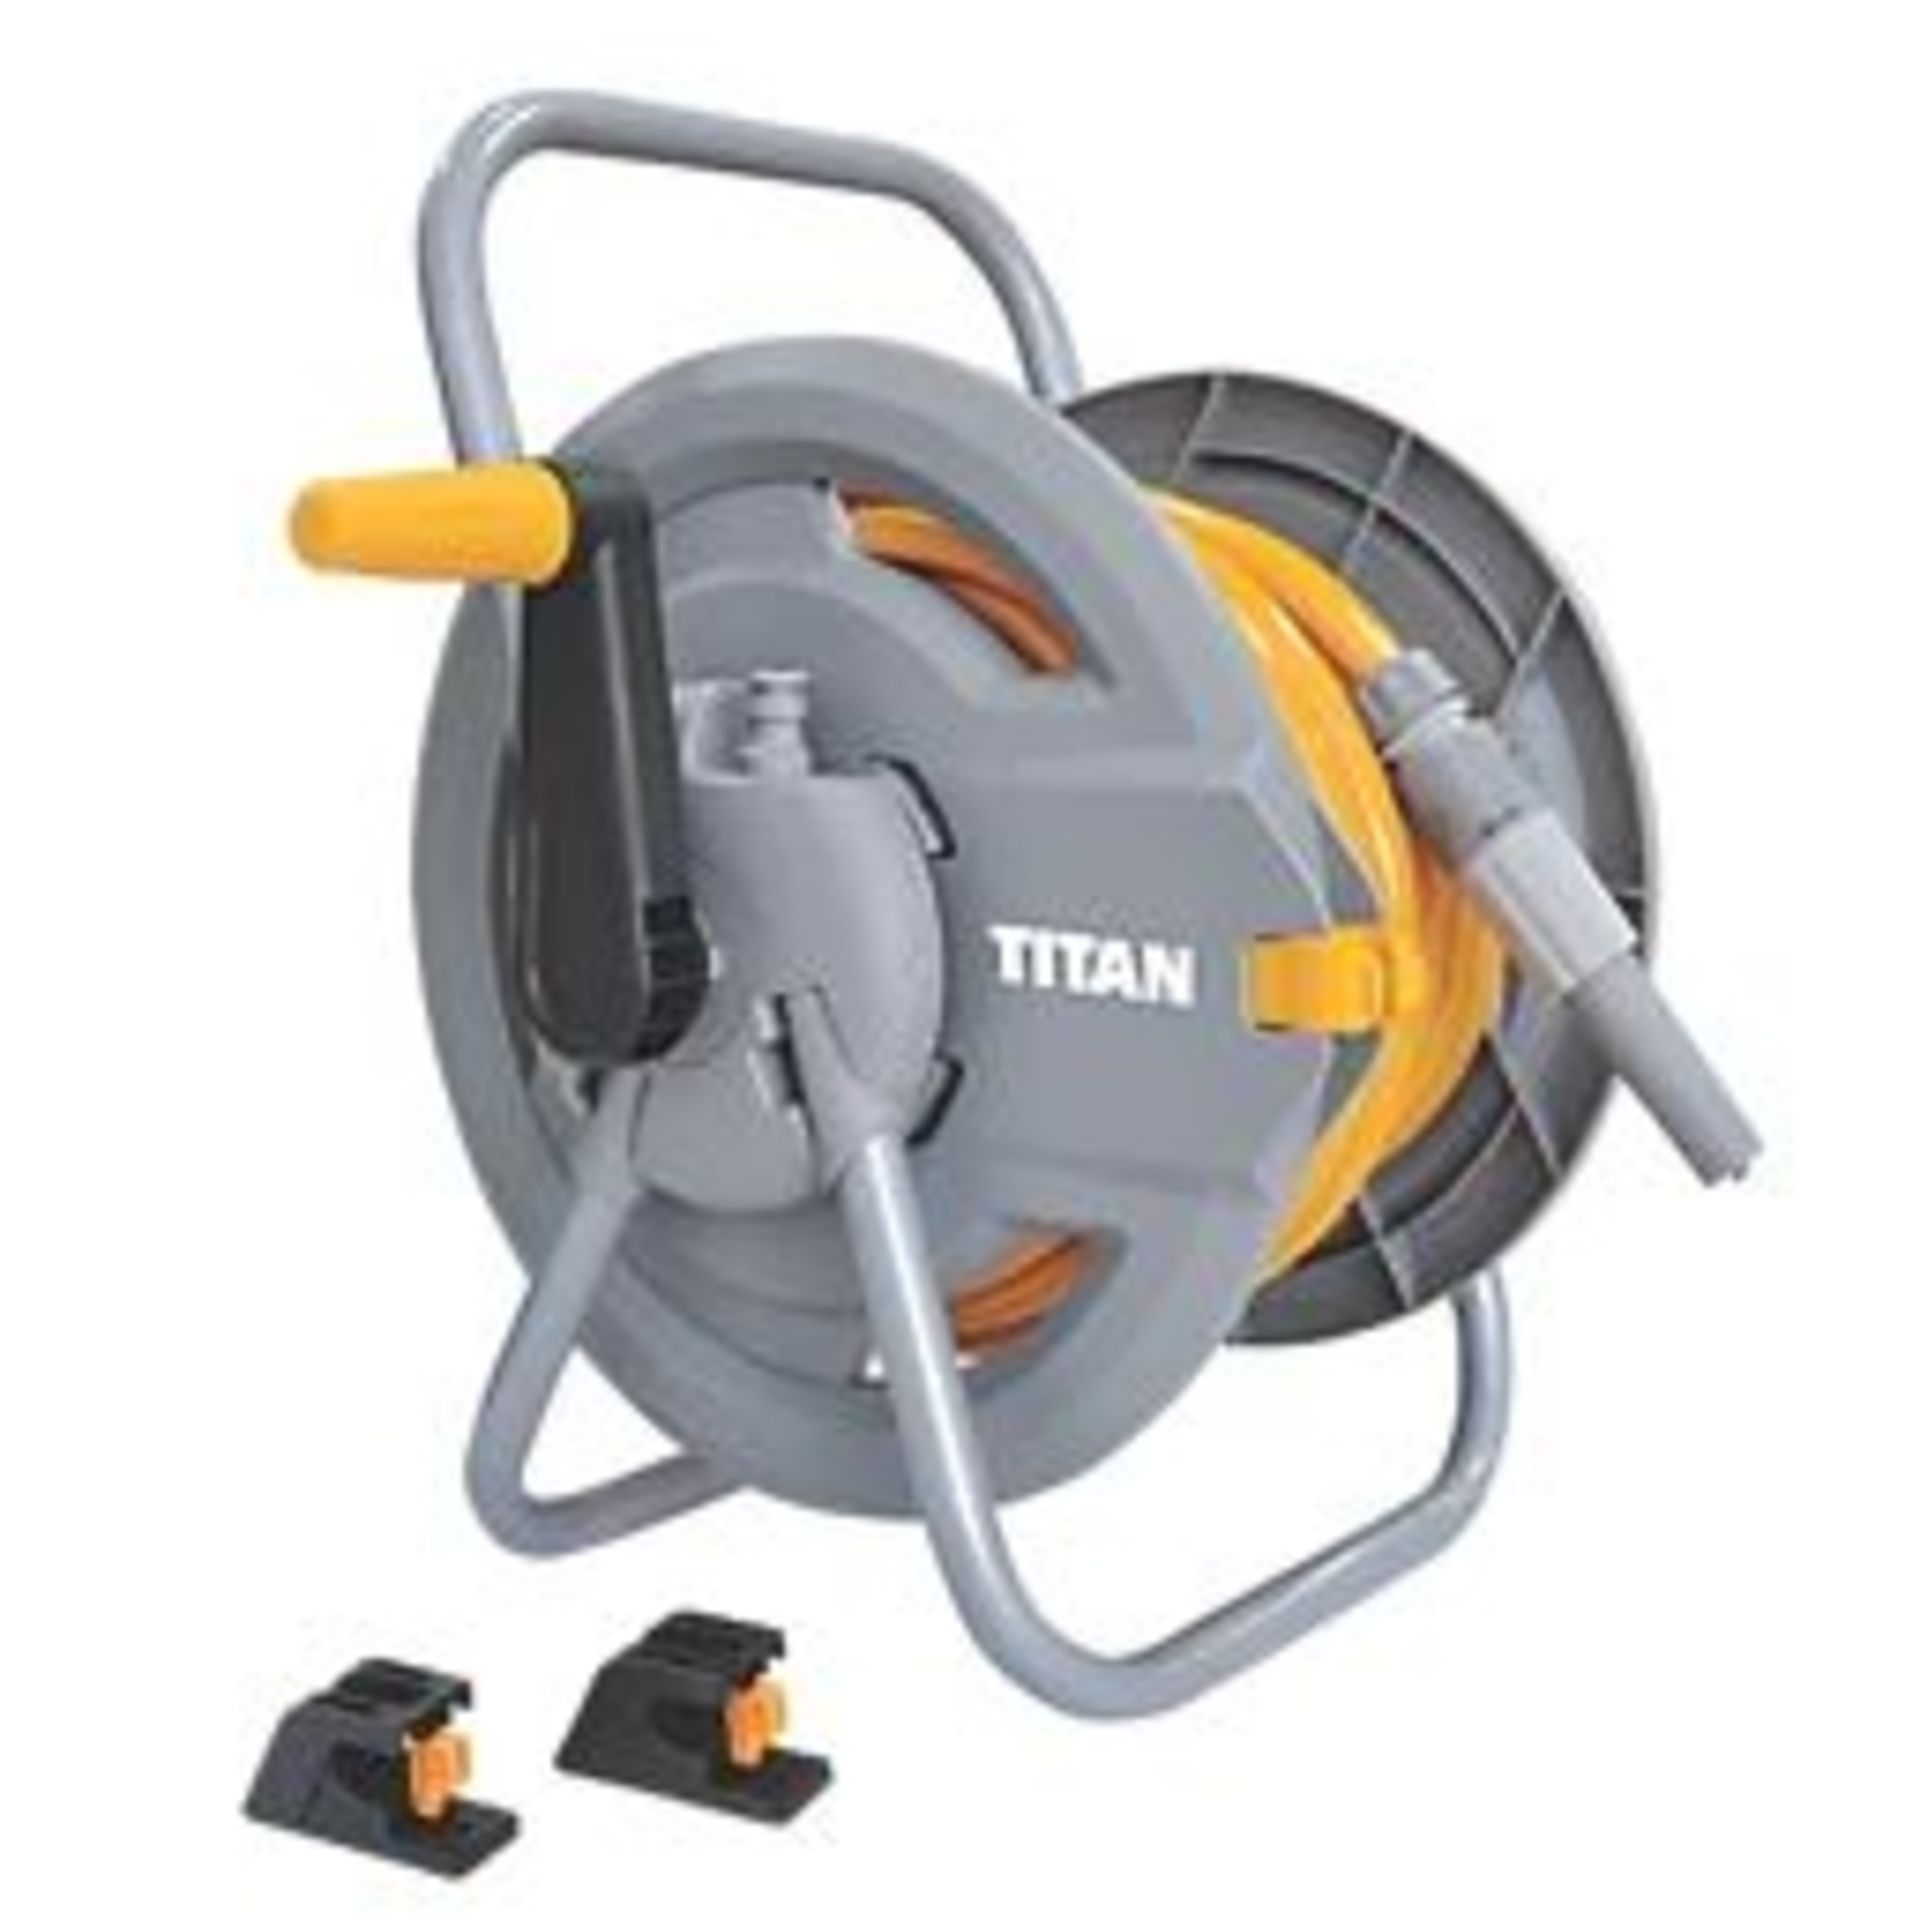 2 x TITAN HOSE REEL 12.5MM X 25M. - PW. Free-standing or wall-mounted Easy-to-assemble hose reel has